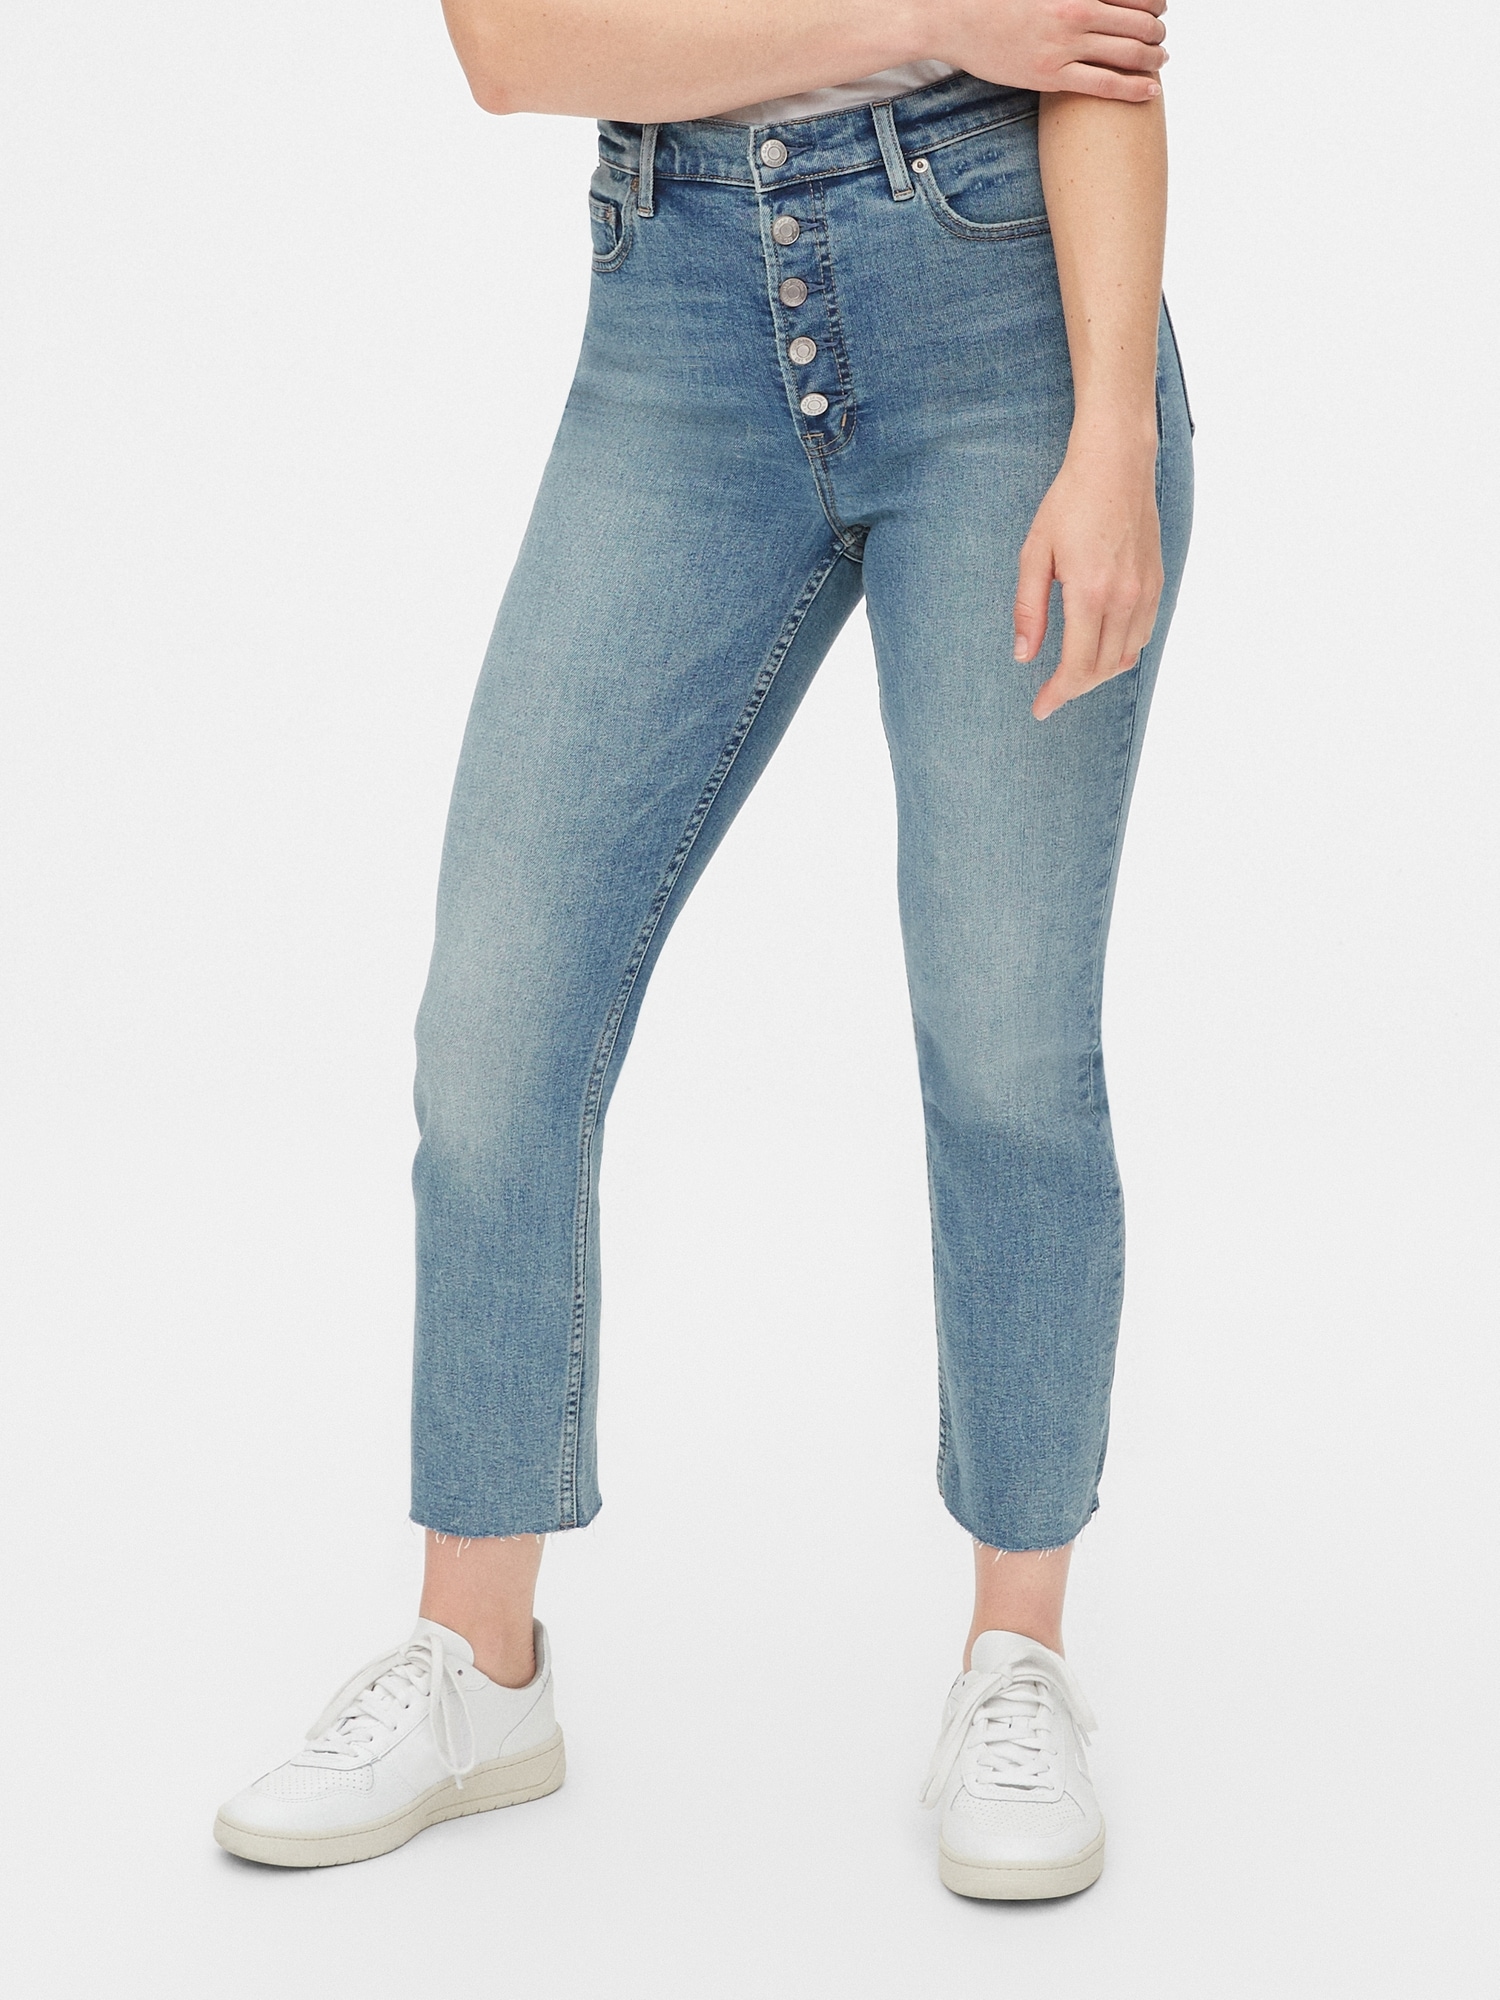 button front jeans for ladies